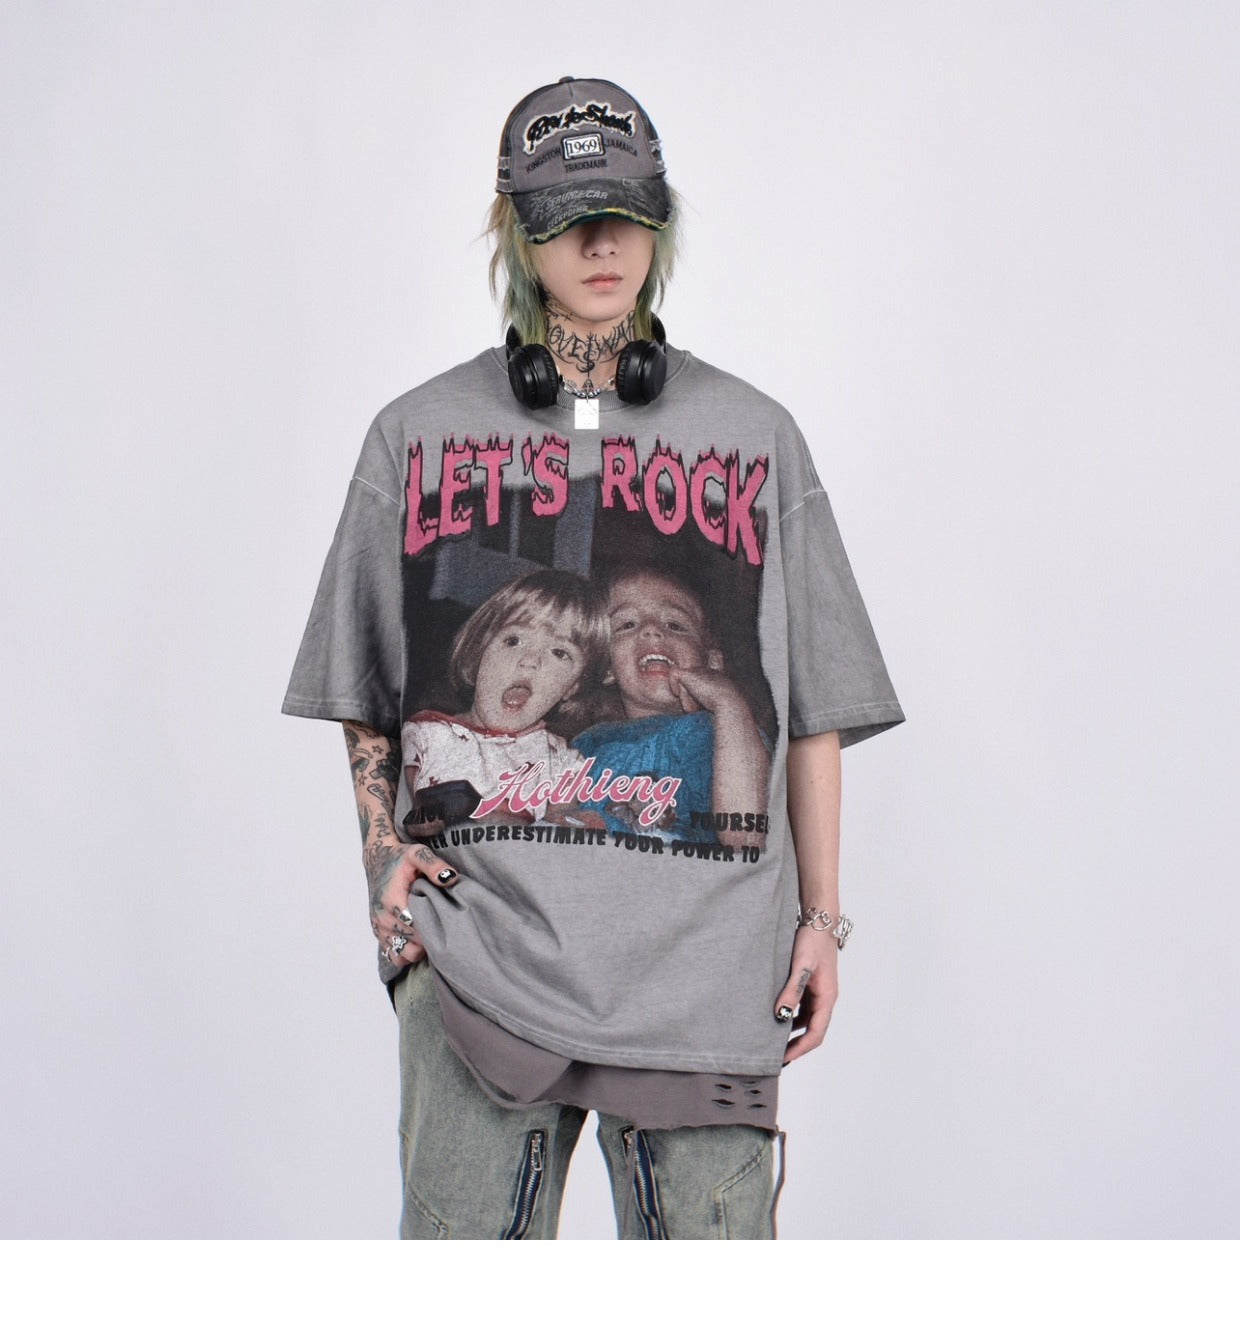 Let’s Rock T-Shirt aesthetic y2k eboy outfits